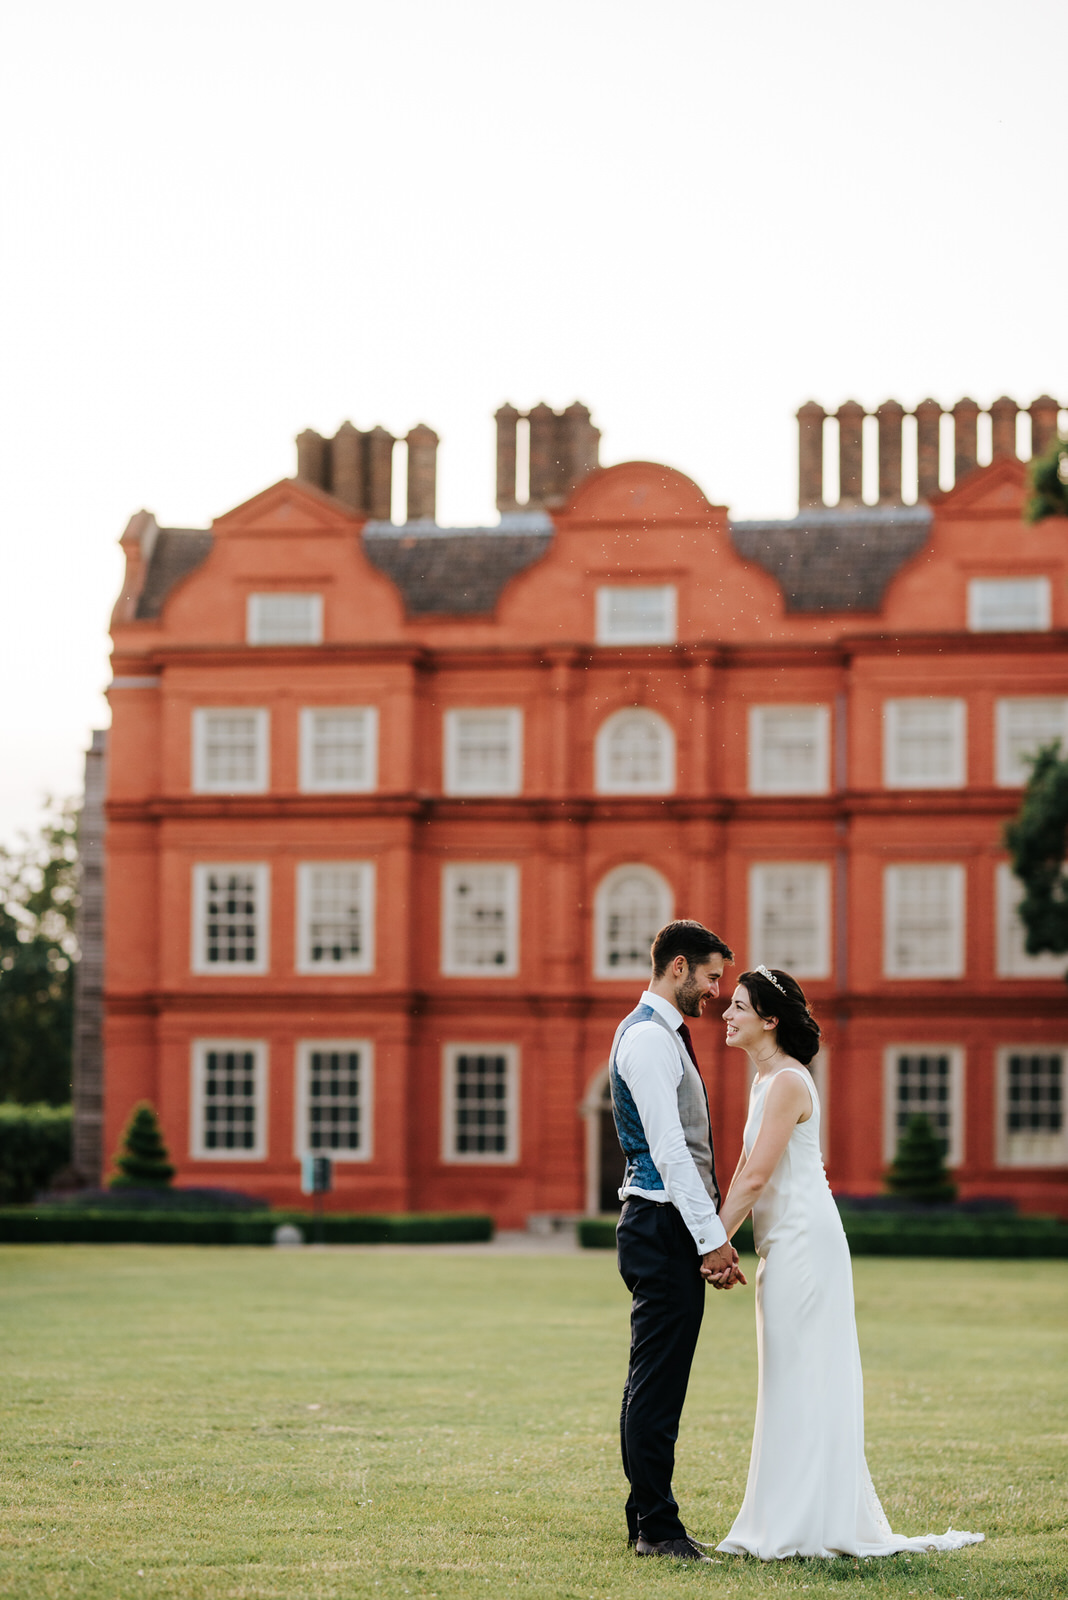  Bride and groom pose in front of kew palace in golden evening light at kew gardens wedding 